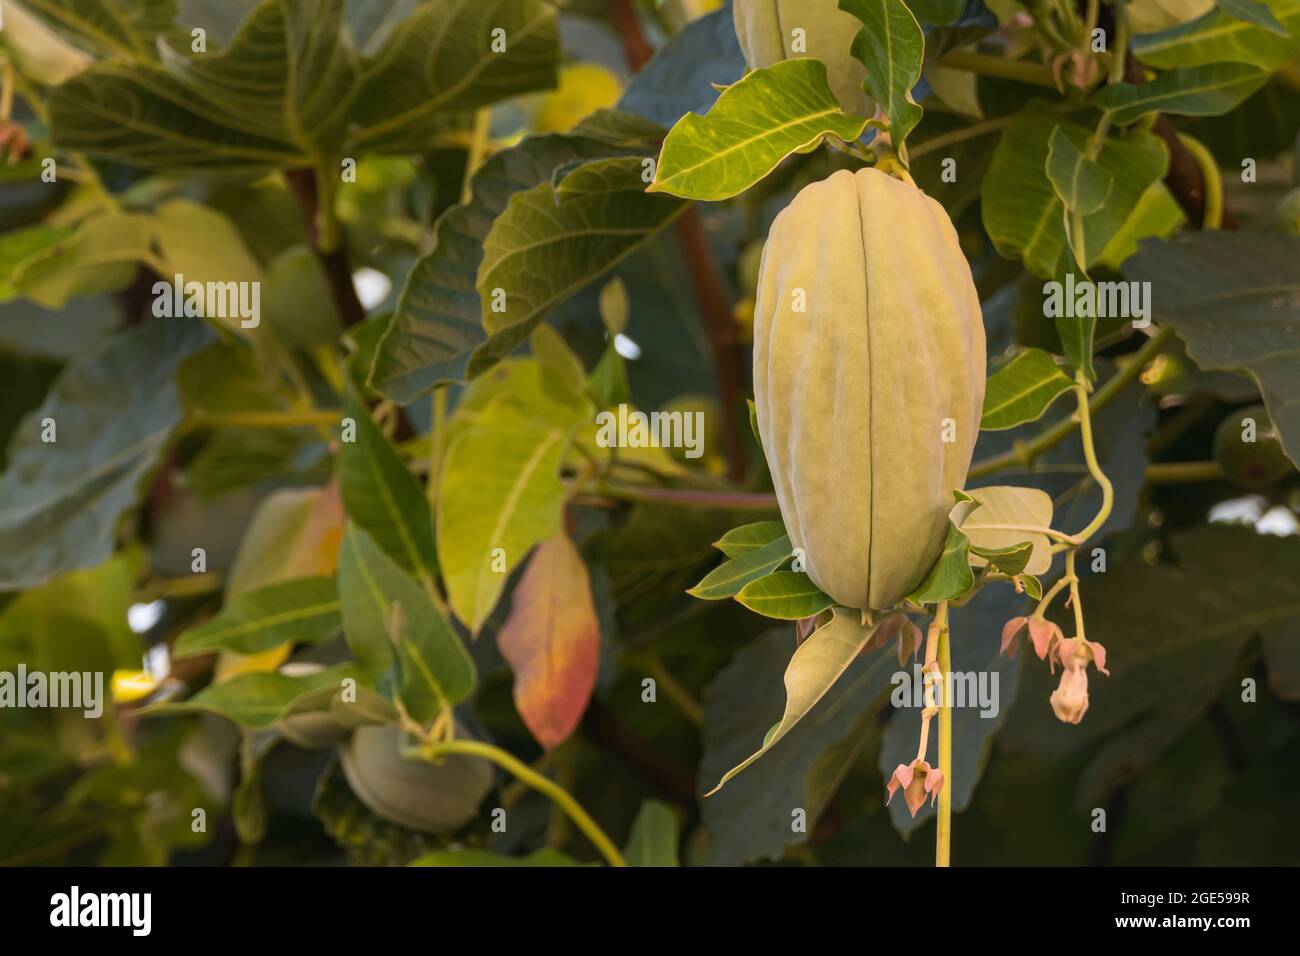 Chayote fruit or Sechium edule growing on the plant in summer outdoors Stock Photo